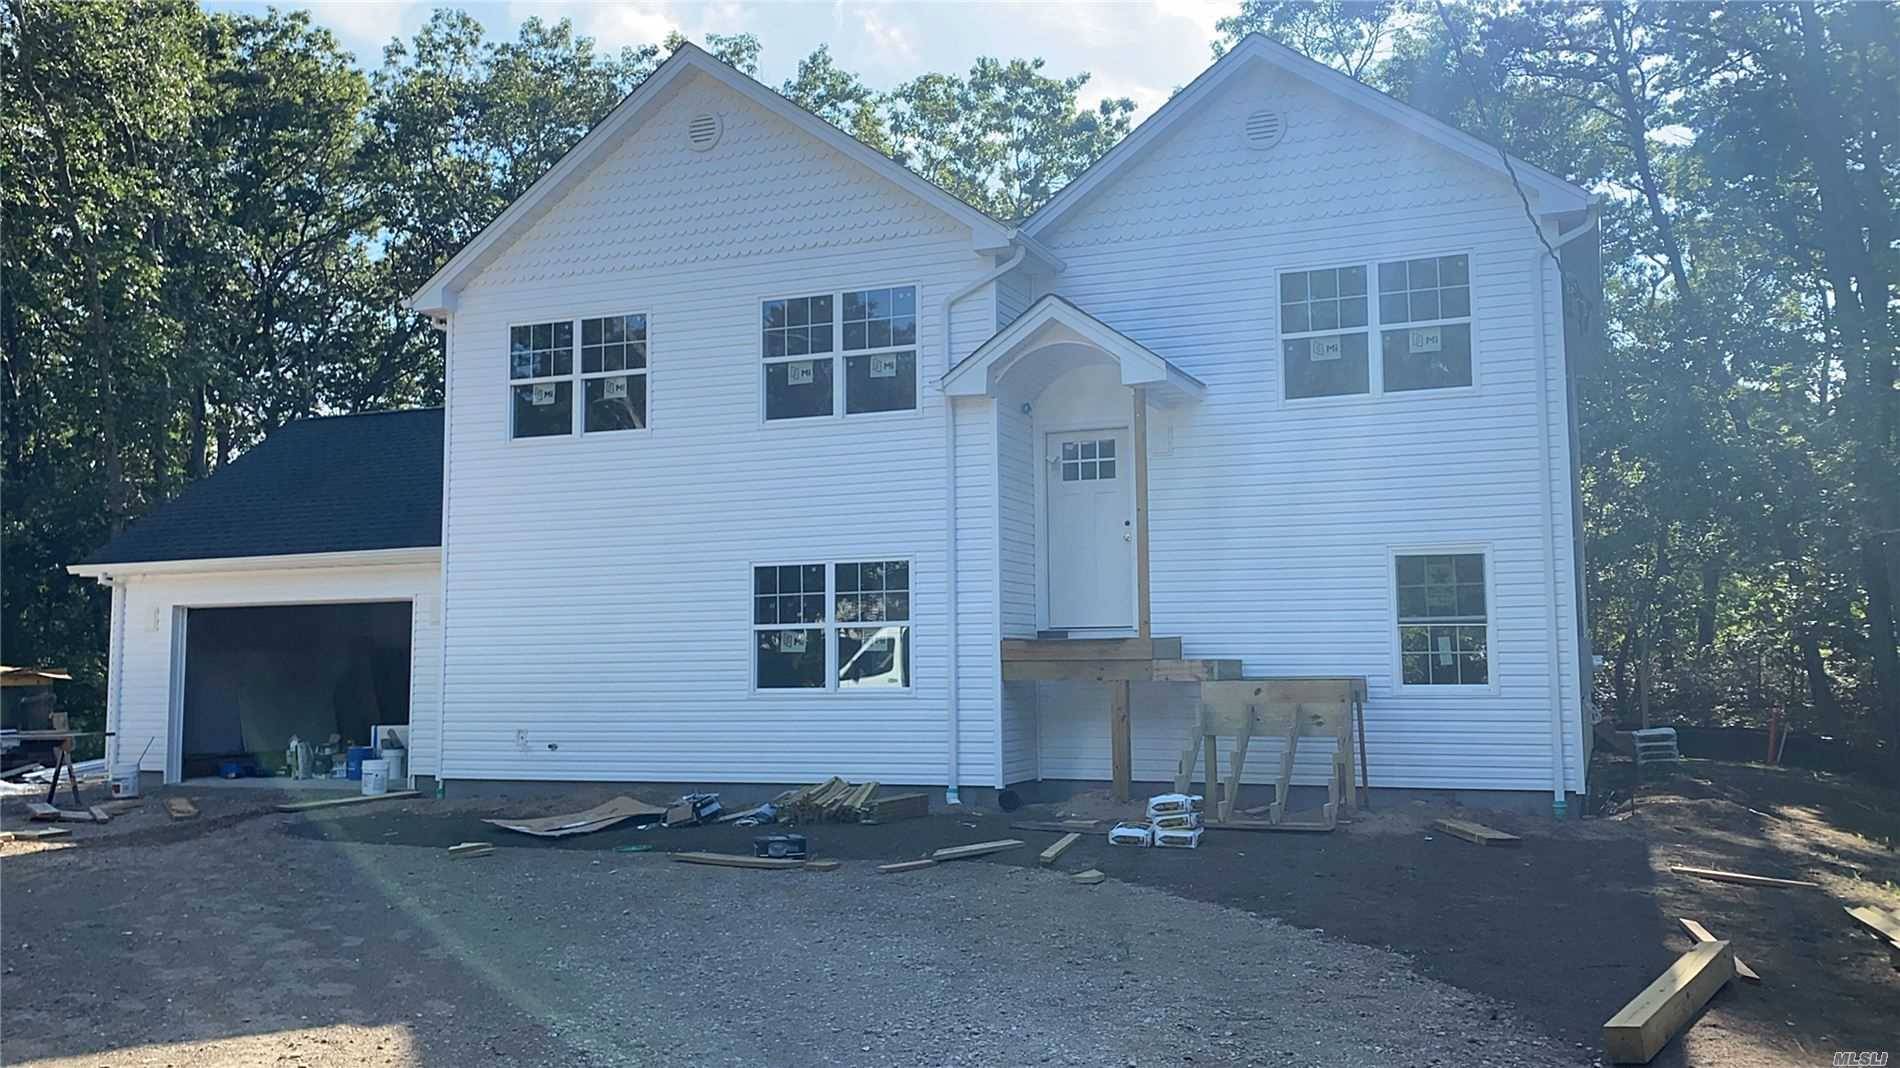 Brand new house with 4 Bedrooms, 3 Baths, open concept living room dining room kitchen, hardwood floors, new stainless steel appliances, new wood cabinets, counter tops, hardwood floors, 2 car ...